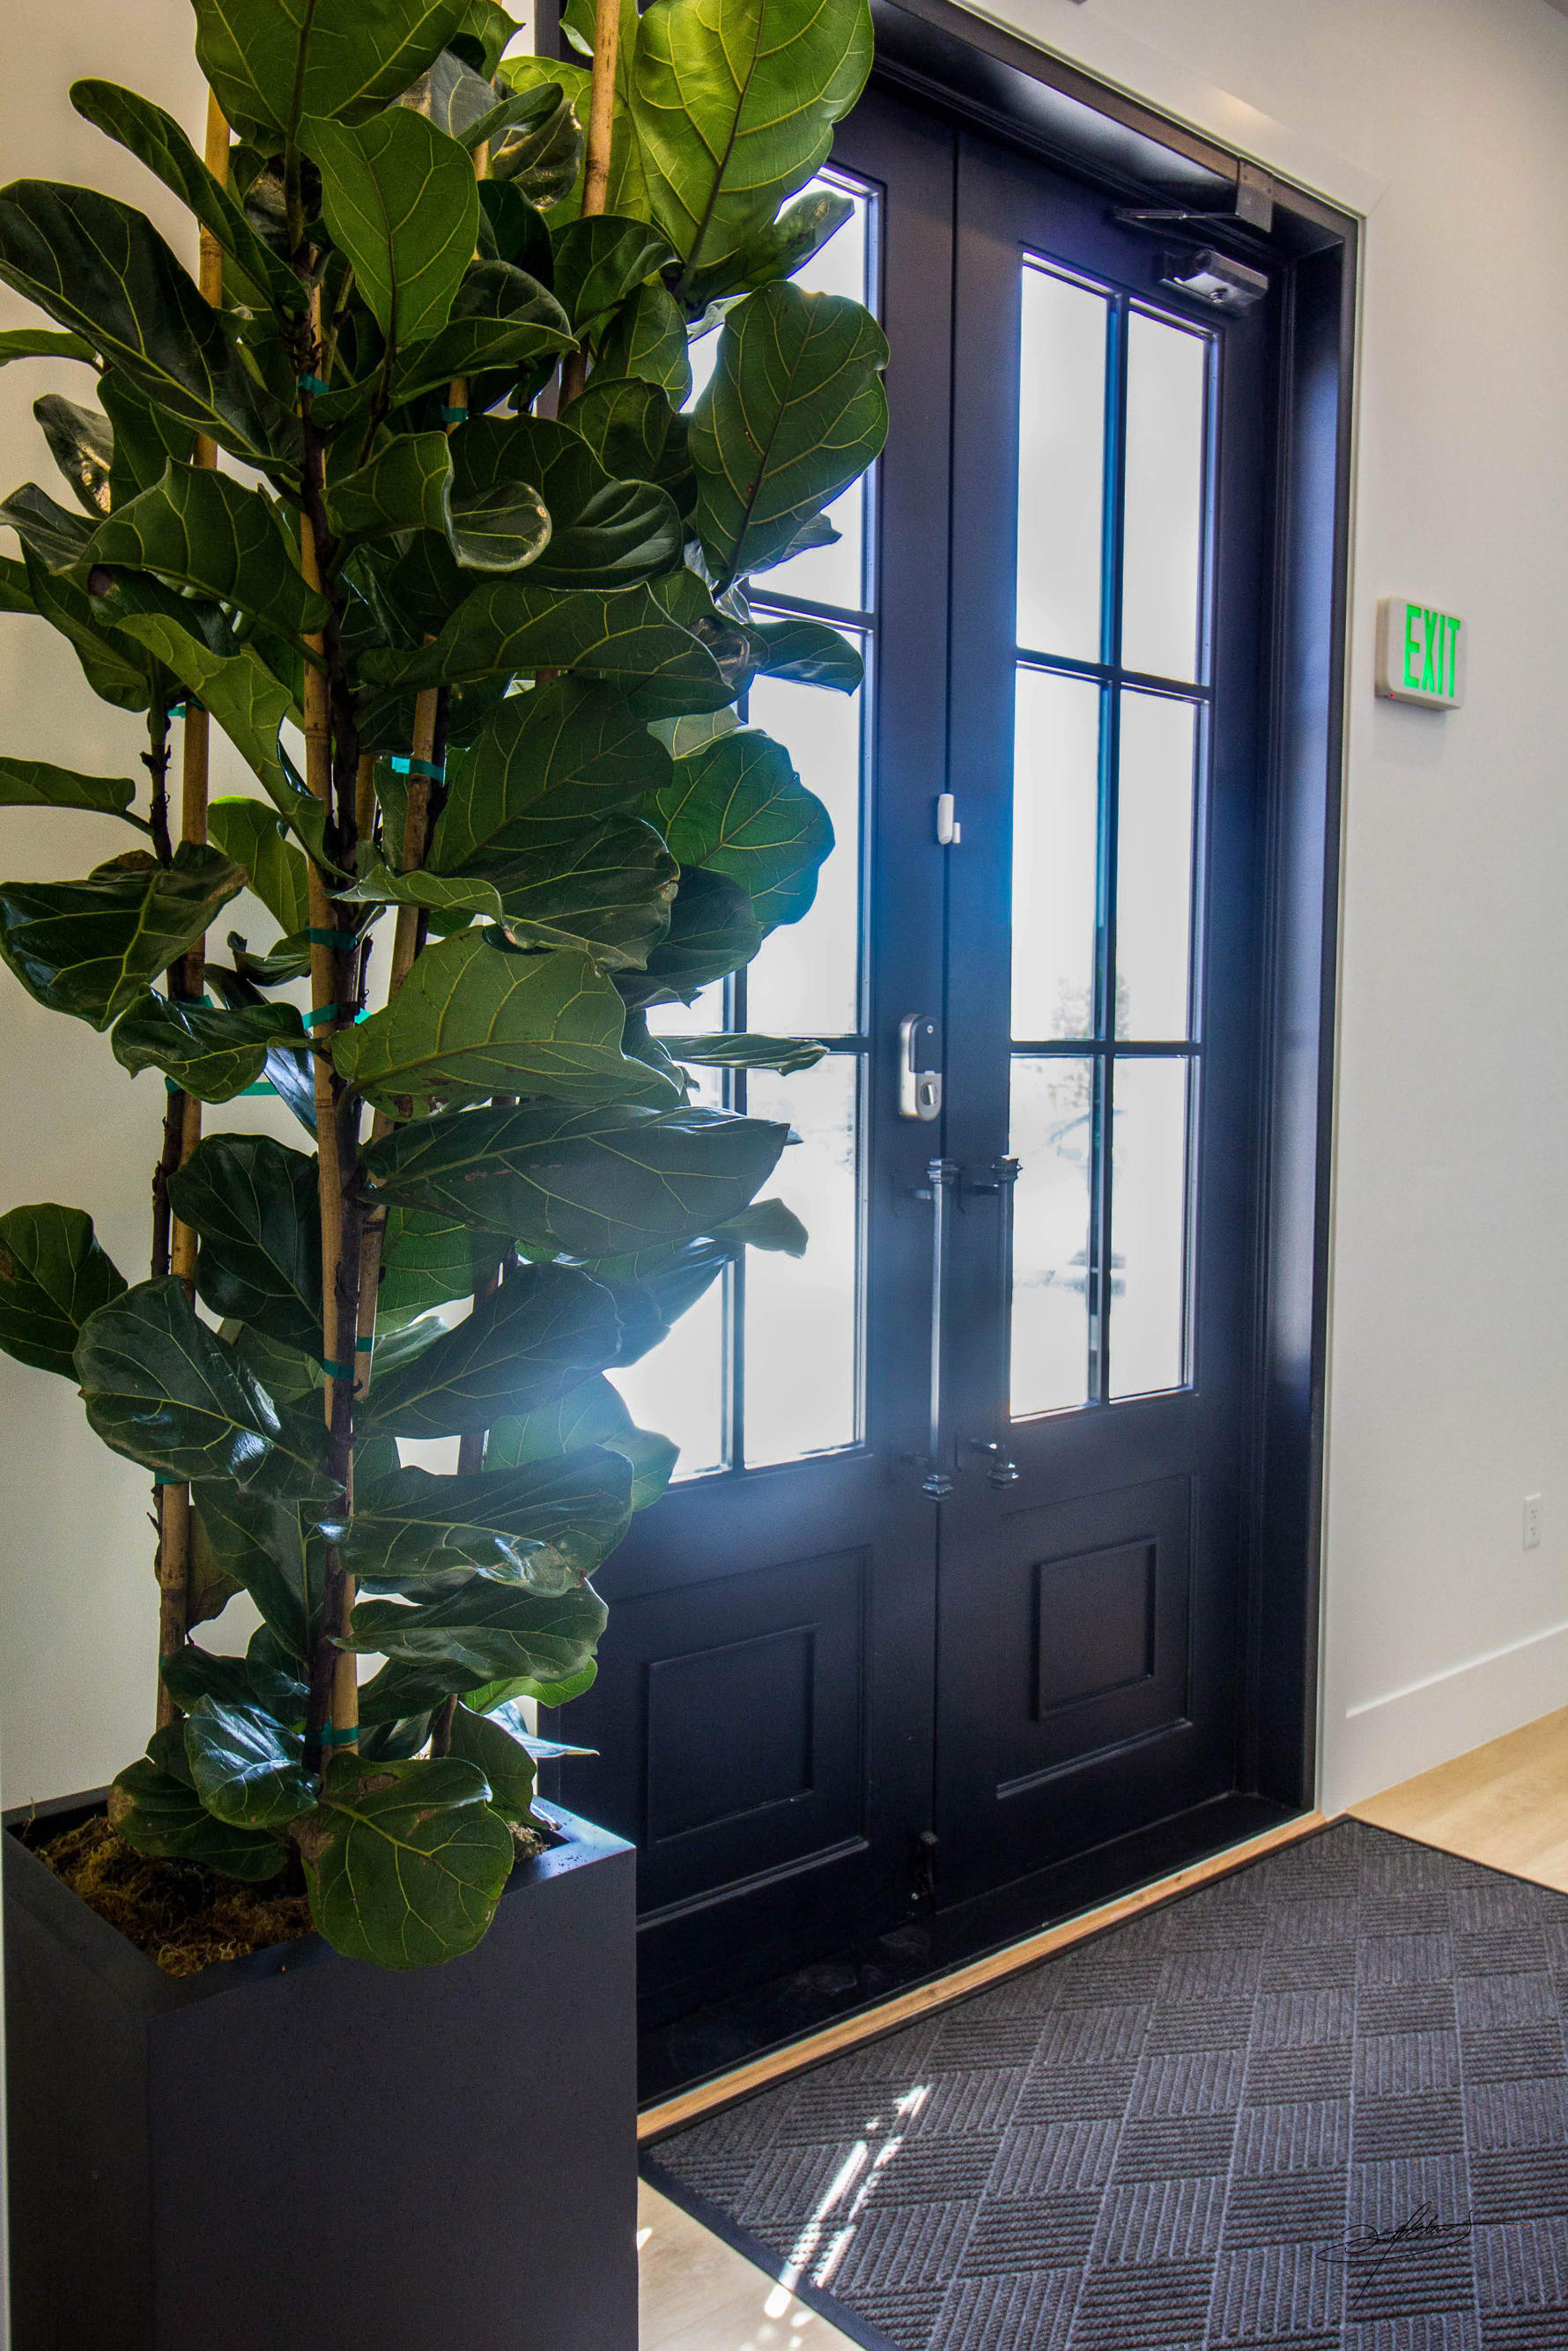 ficus planted in a container next to large doors